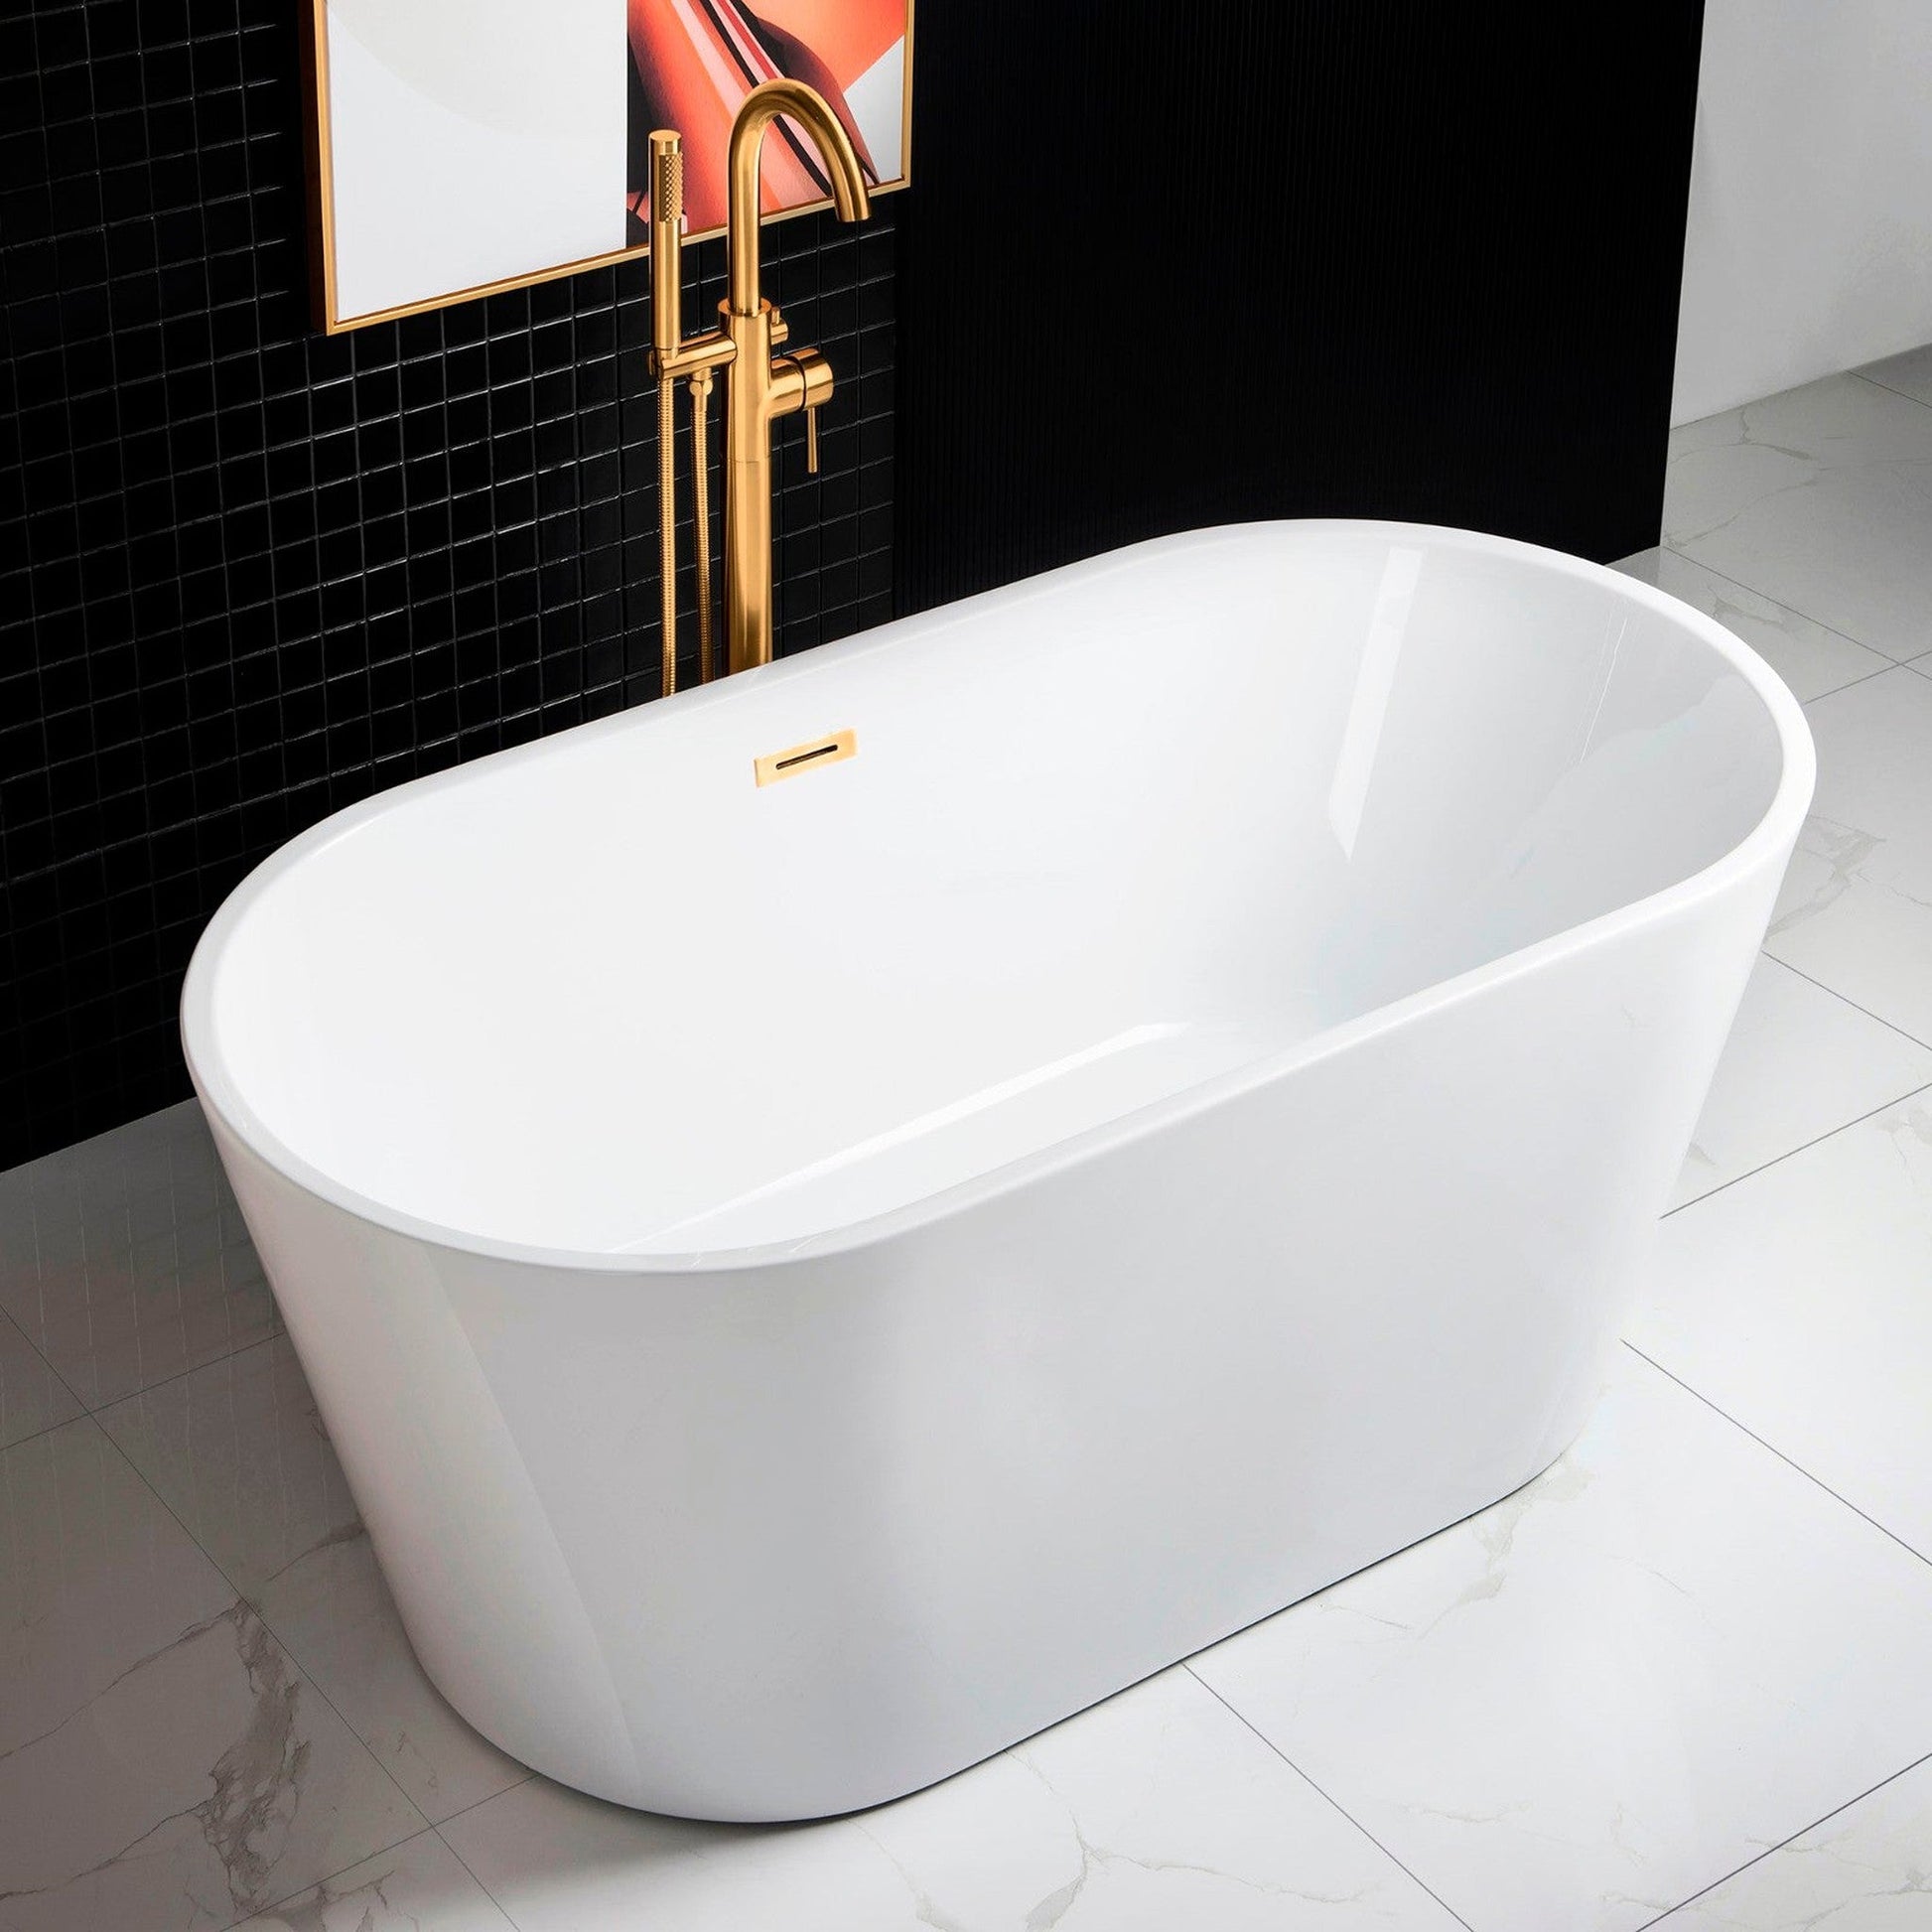 WoodBridge B0014 59" White Acrylic Freestanding Soaking Bathtub With Brushed Gold Drain, Overflow, F-0007BGVT Tub Filler and Caddy Tray